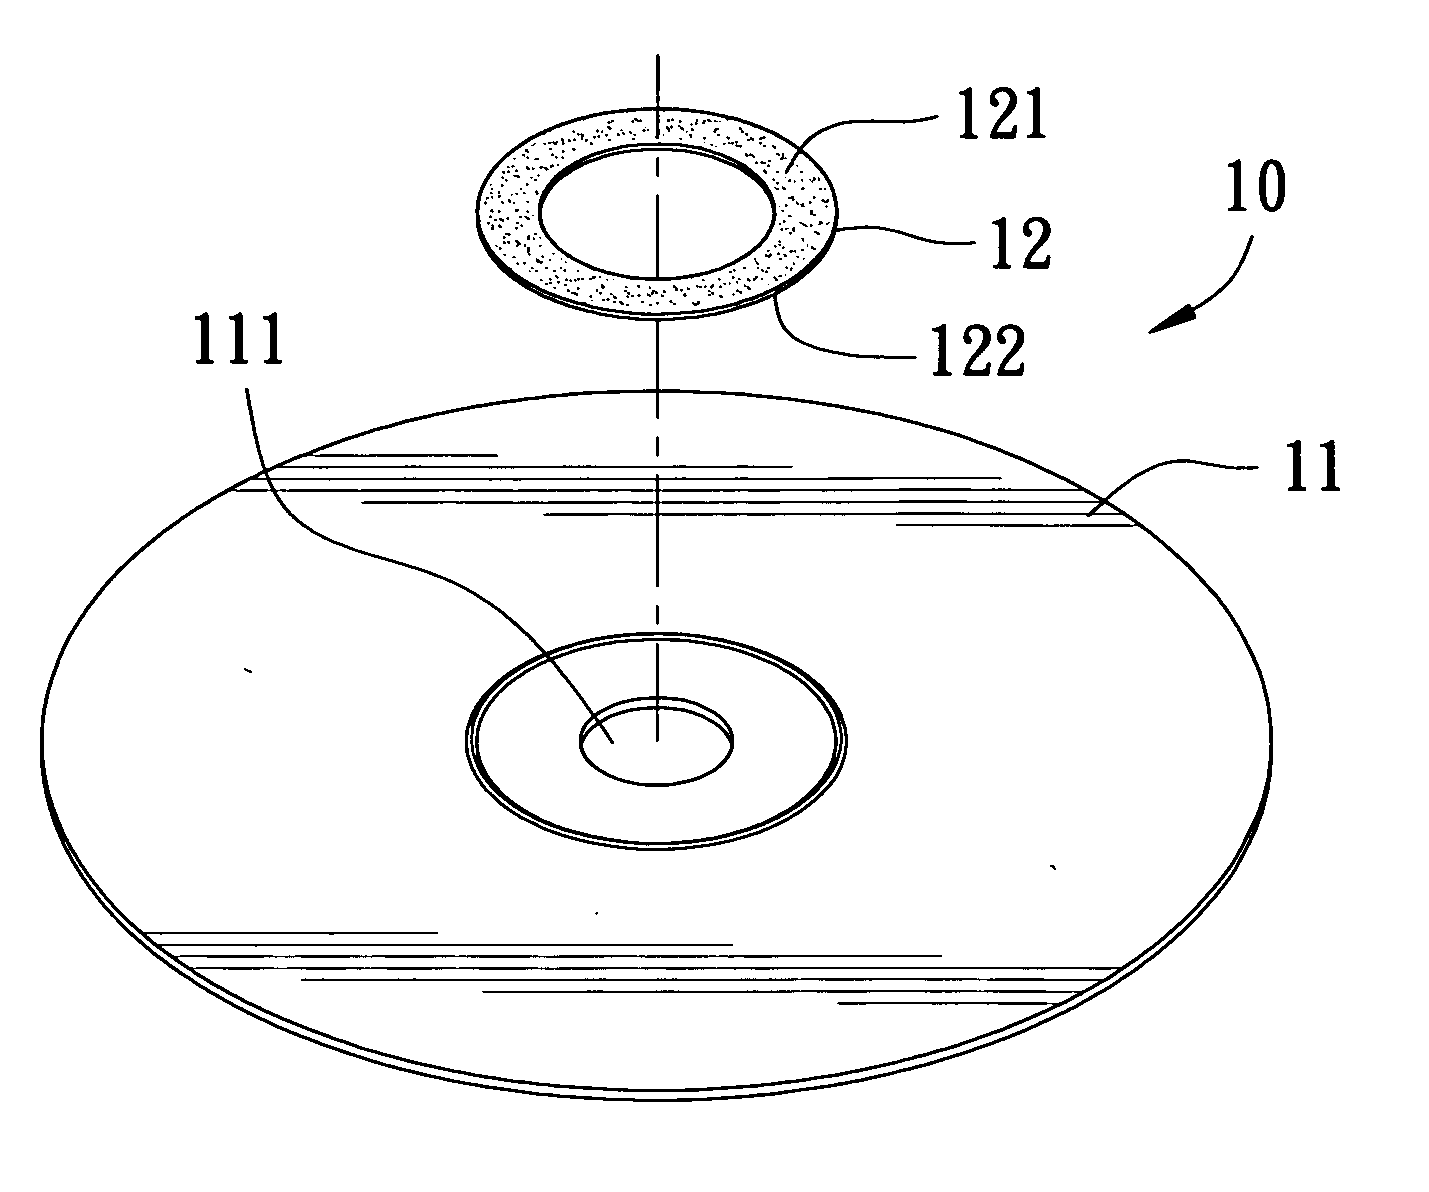 Cleaning device for the main shaft CD carrying tray of a CD player